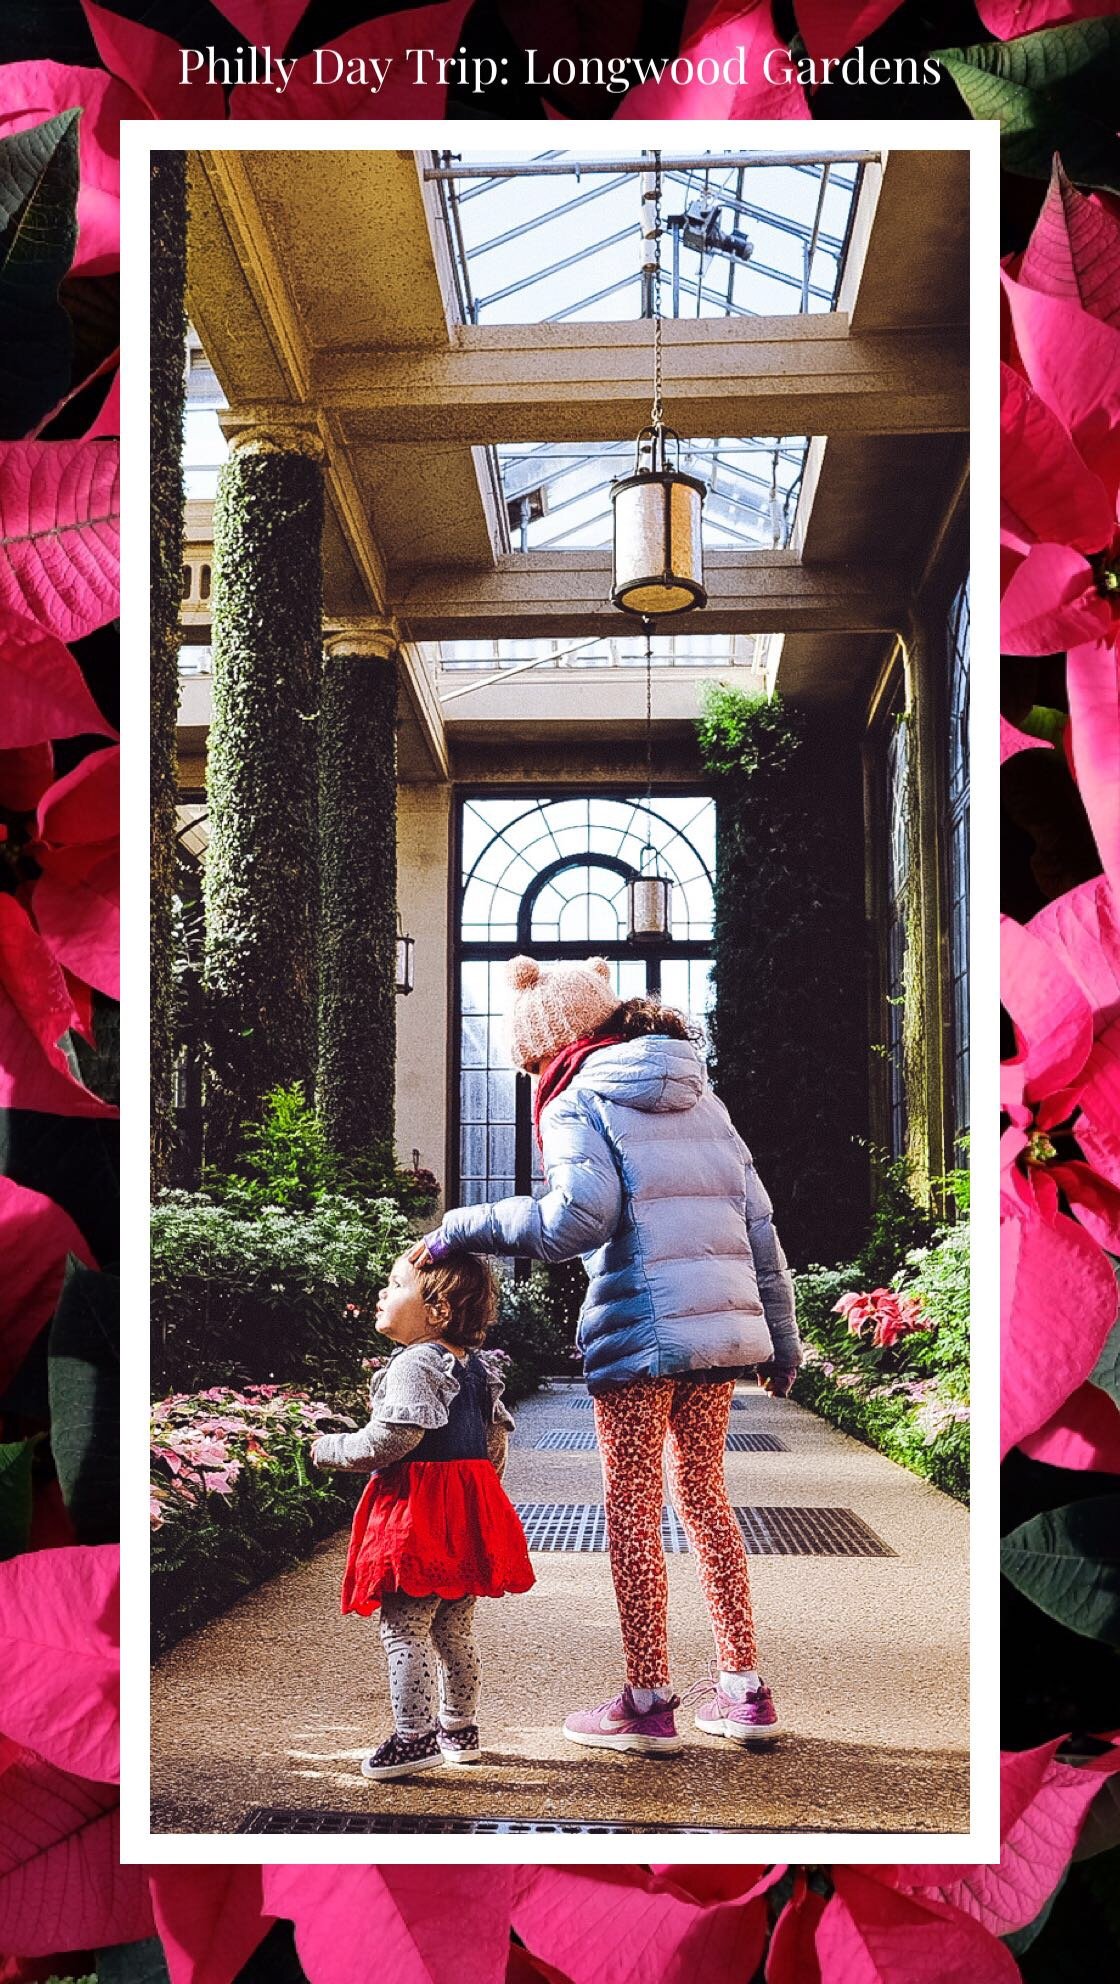 Chocolate and Lace shares a day trip from Philadelphia to Longwood Gardens.